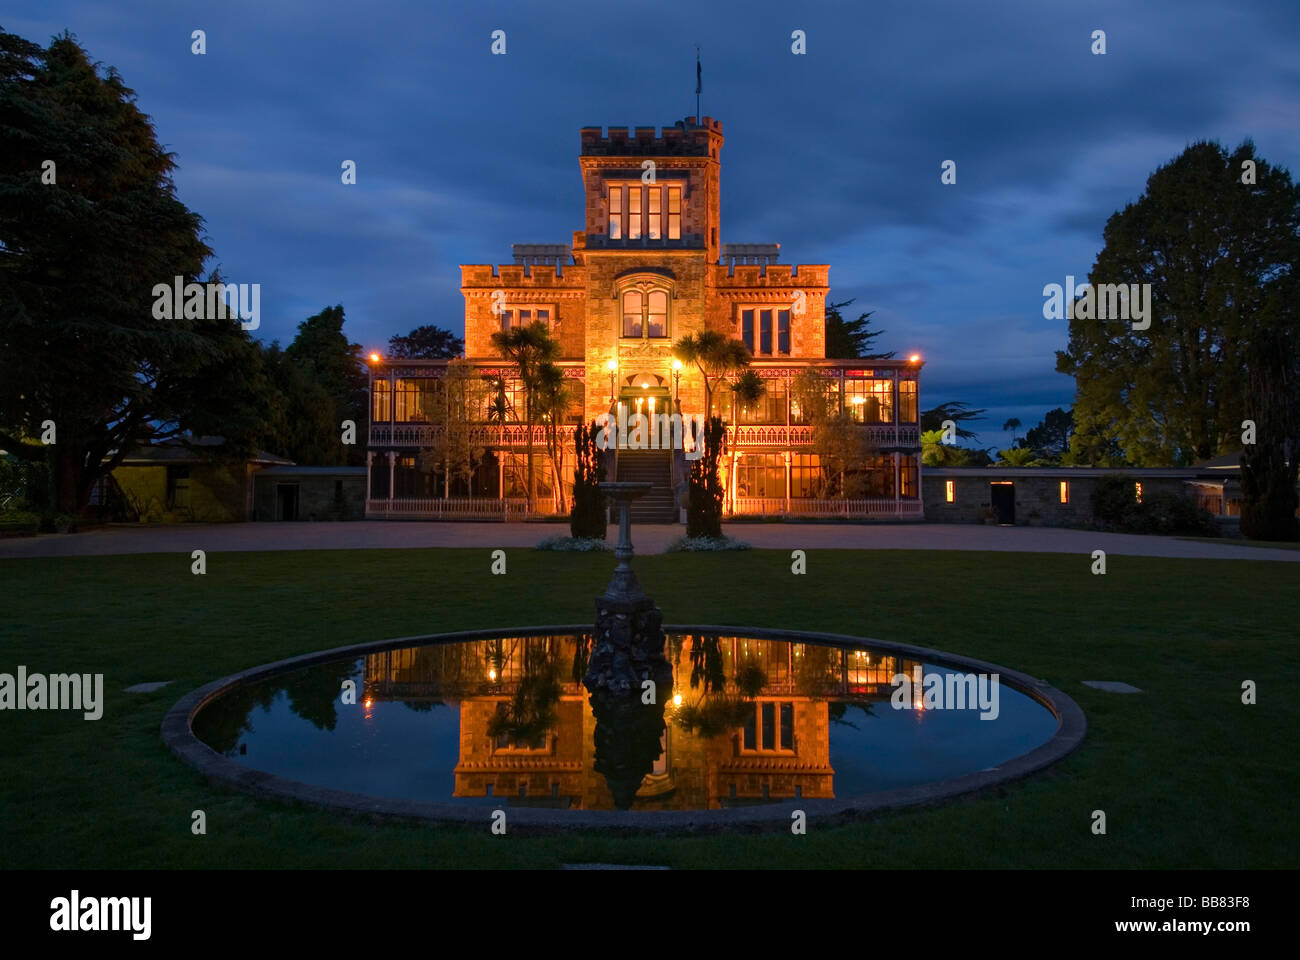 Larnach Castle on the Otago Peninsula and its reflexion in the pond of a fountain illuminated by floodlight, New Zealand Stock Photo